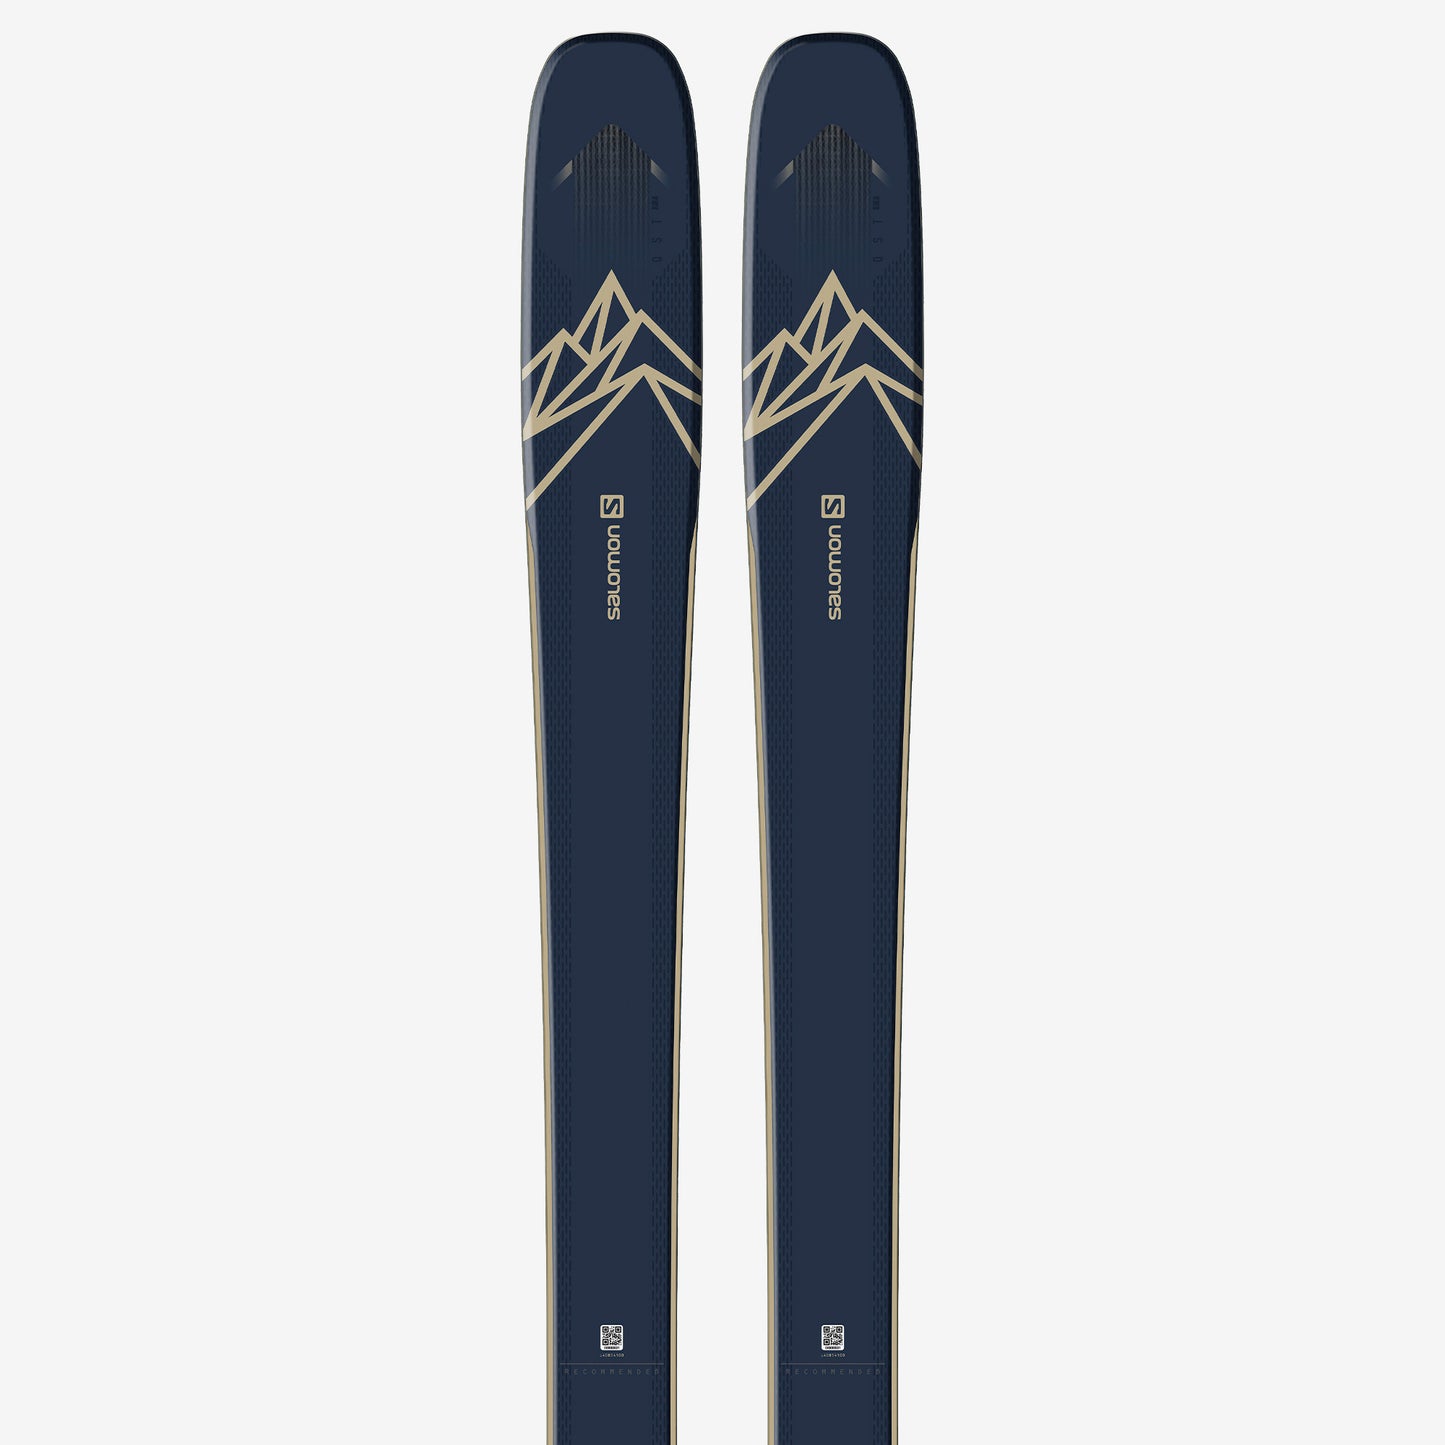 SALOMON QST 99 SKIS **in store pick-up only**